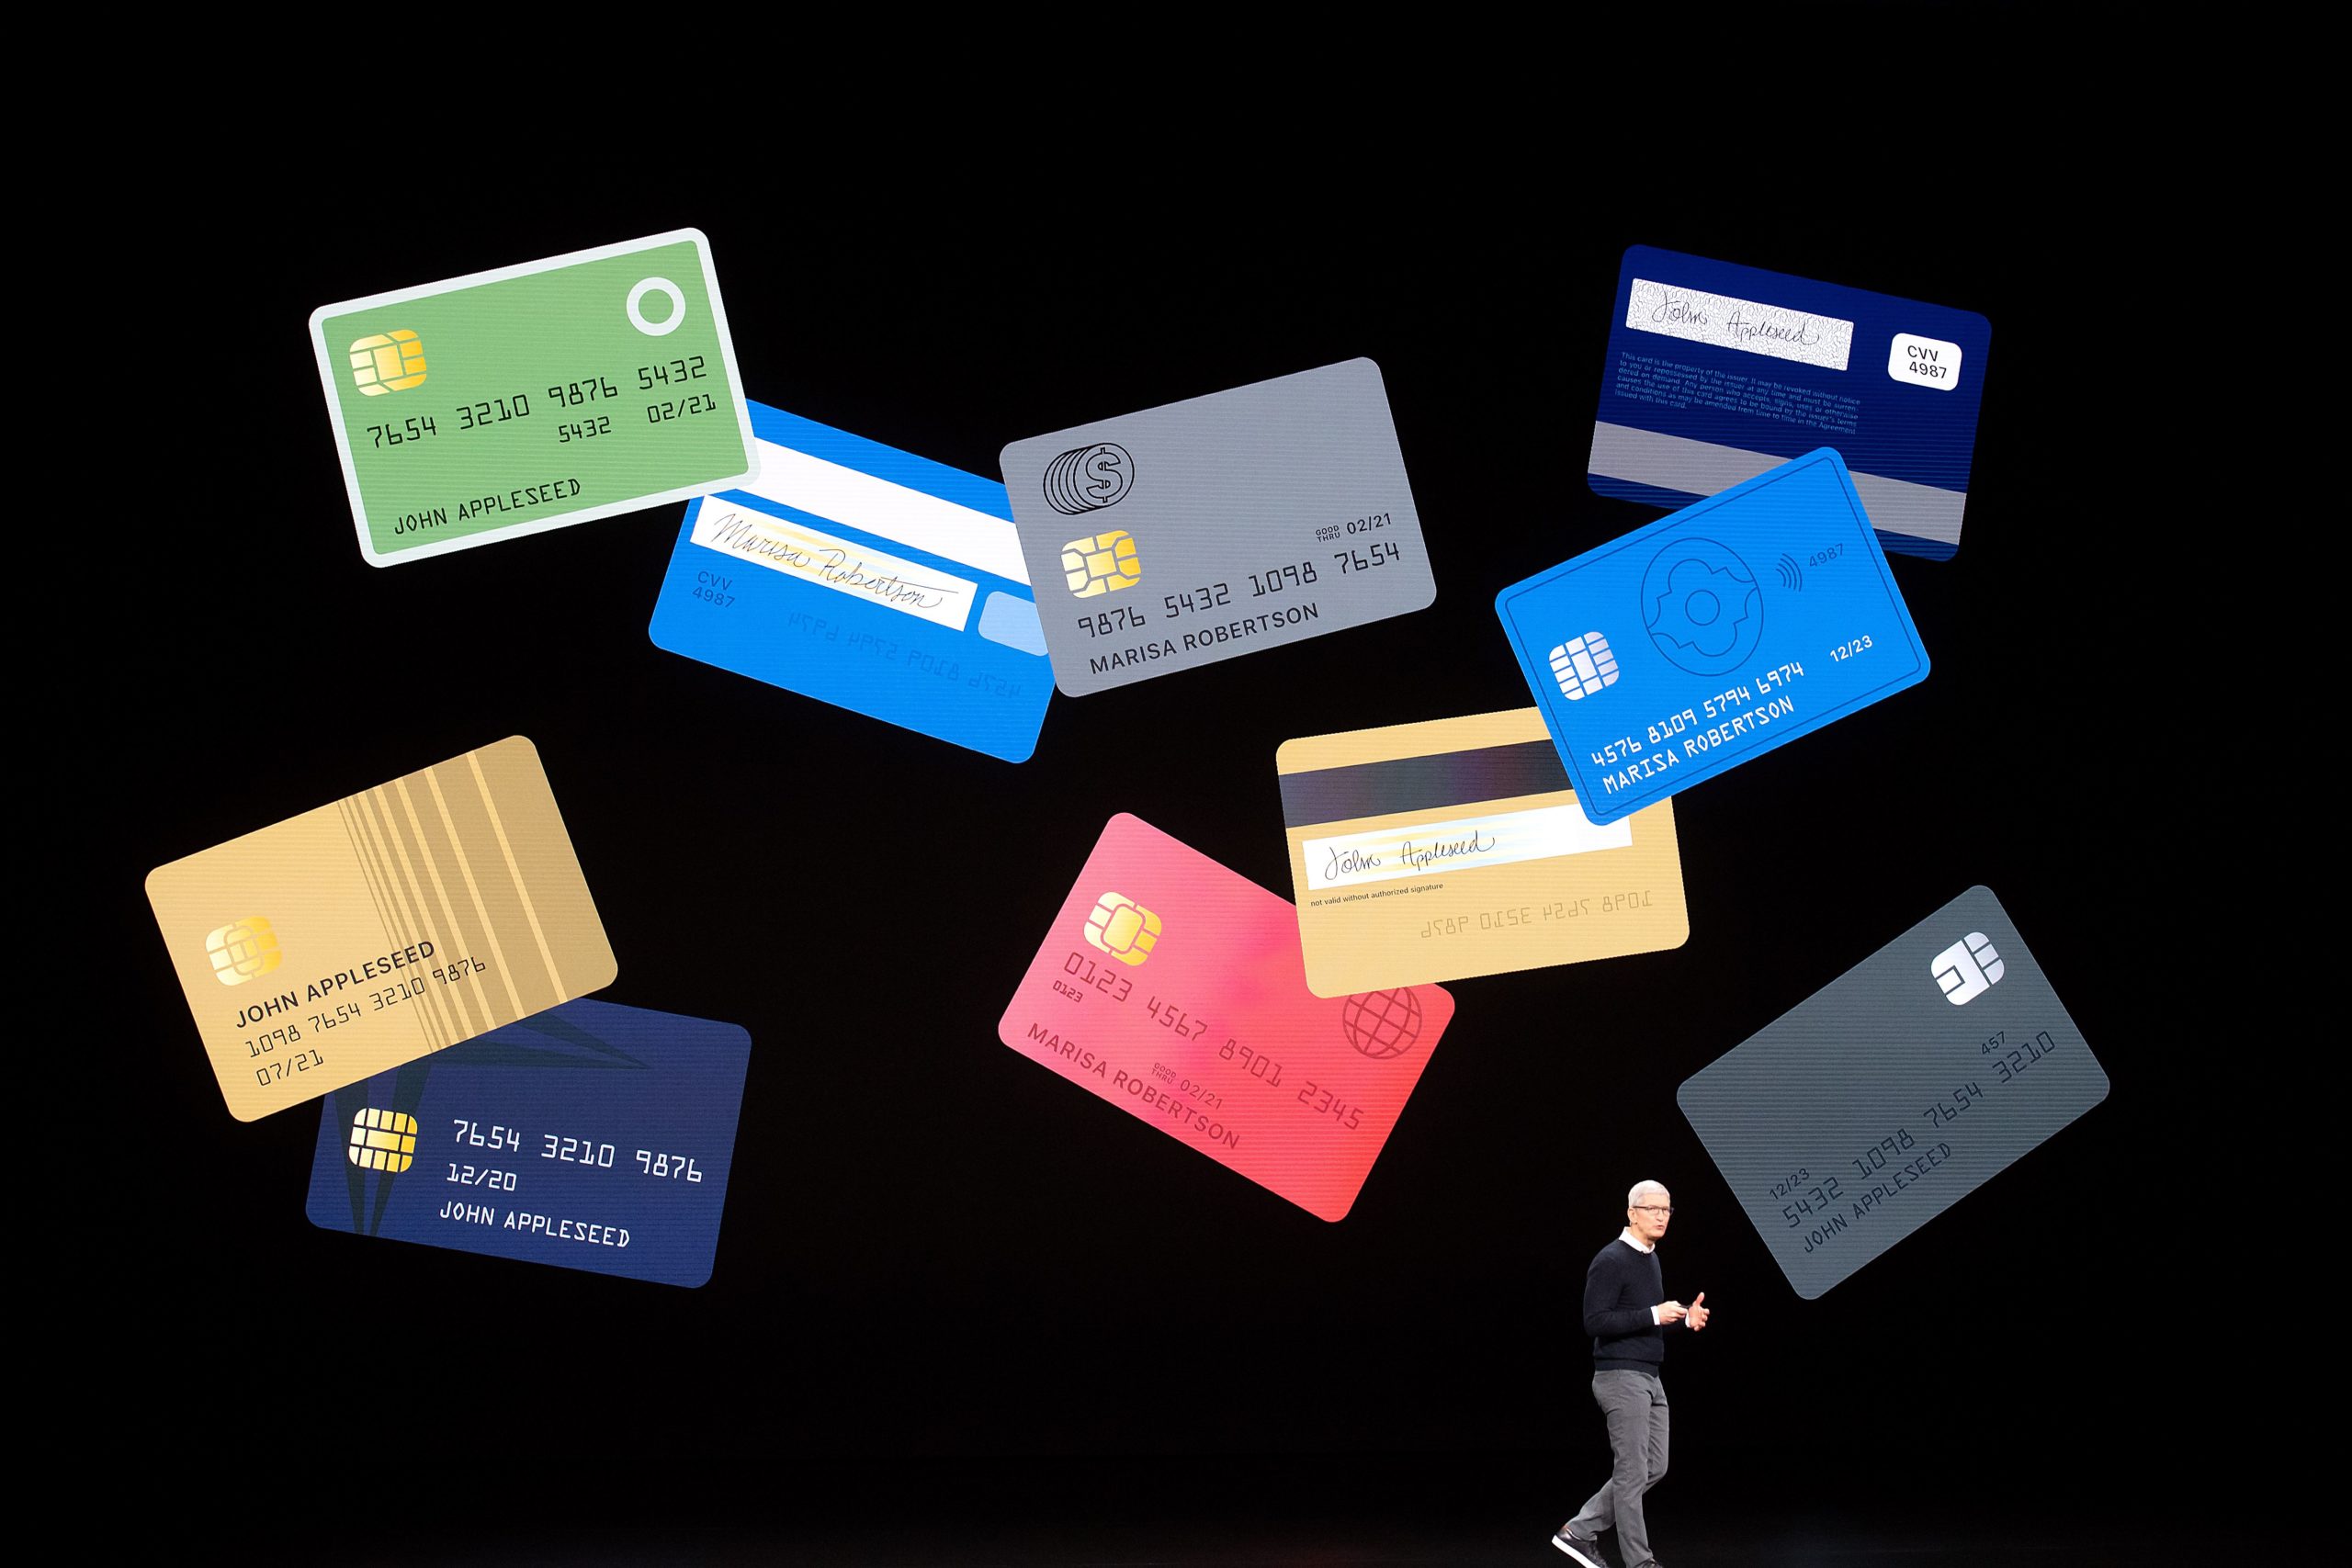 Apple CEO Tim Cook introduces Apple Card during a launch event at Apple headquarters on Monday, March 25, 2019, in Cupertino, California. (Photo by NOAH BERGER / AFP) (Photo credit should read NOAH BERGER/AFP via Getty Images)